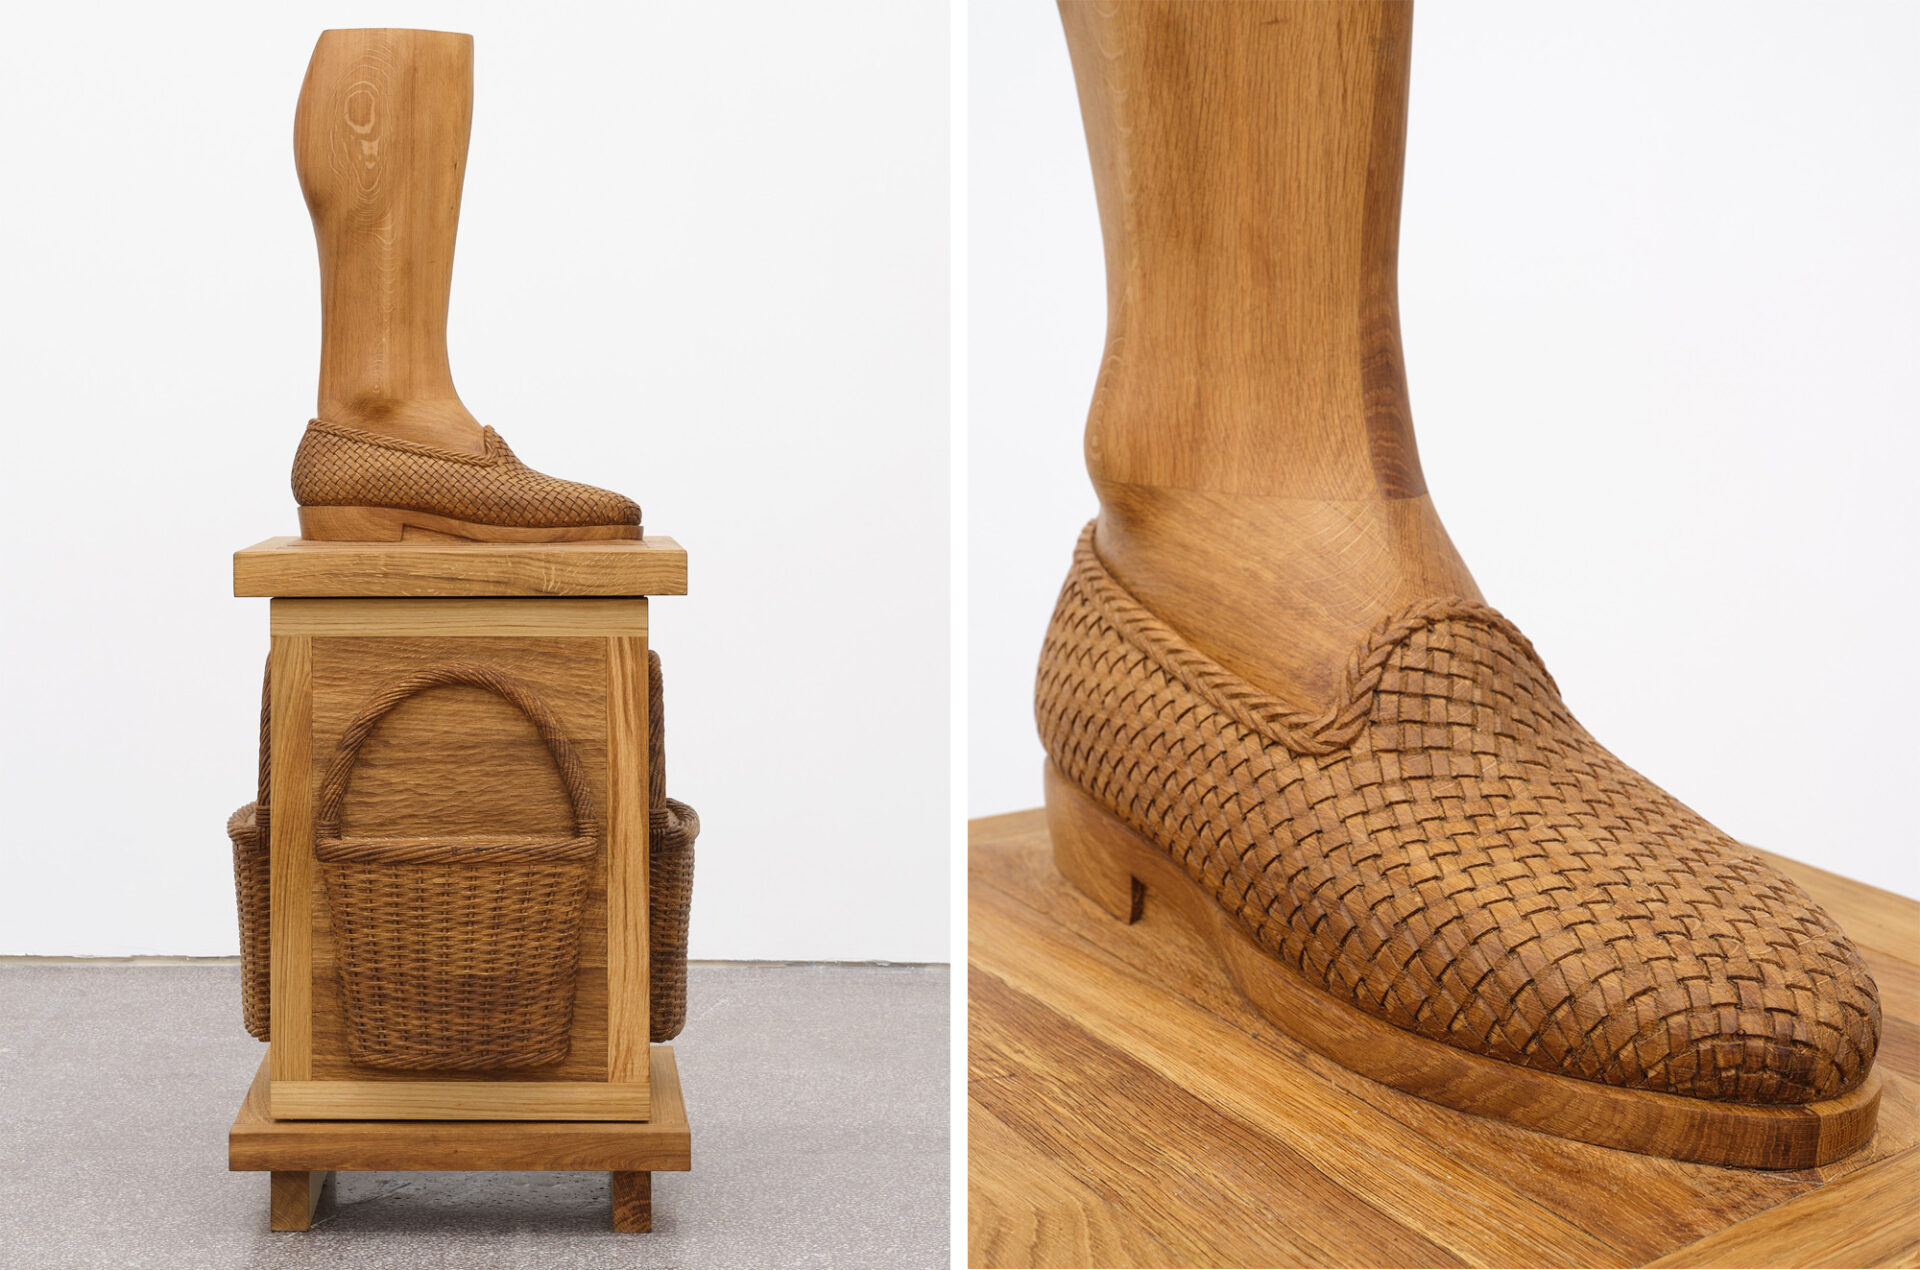 two side-by-side images of a sculptural oak cabinet with baskets around the sides and a foot on top with a woven loafer